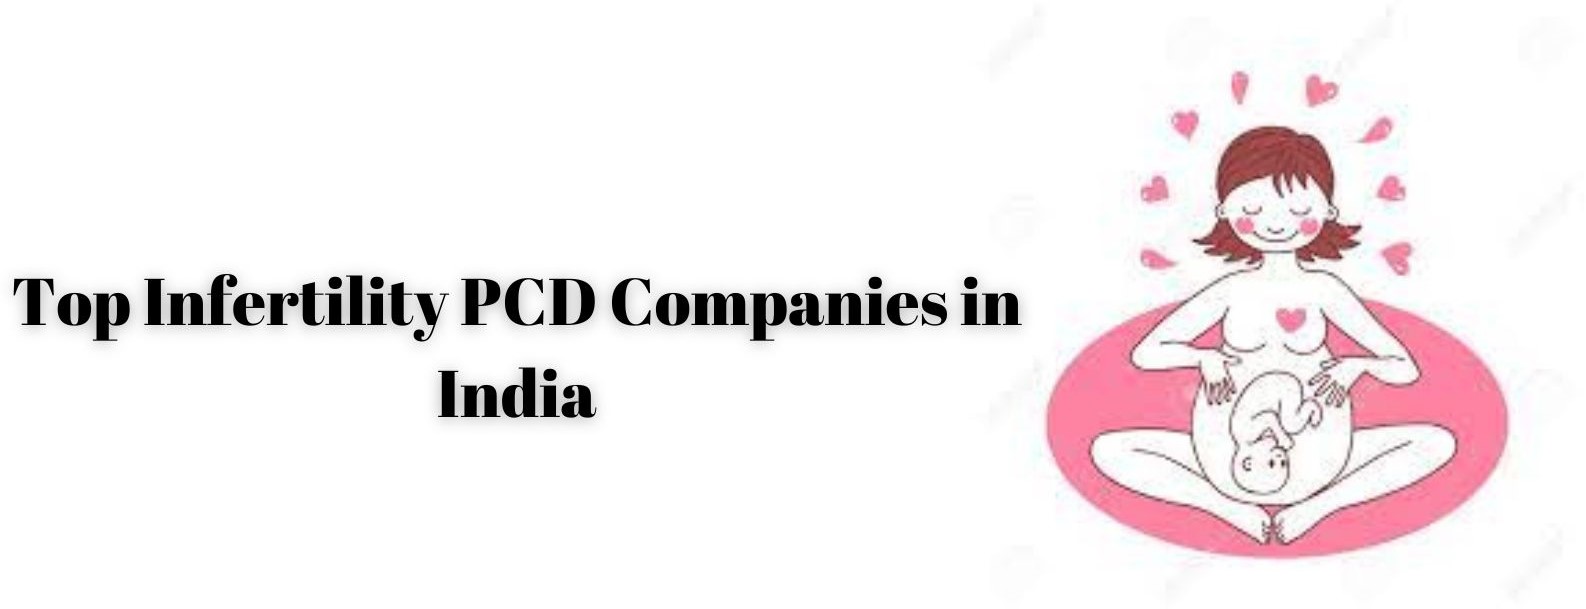 Top Infertility PCD Companies in India